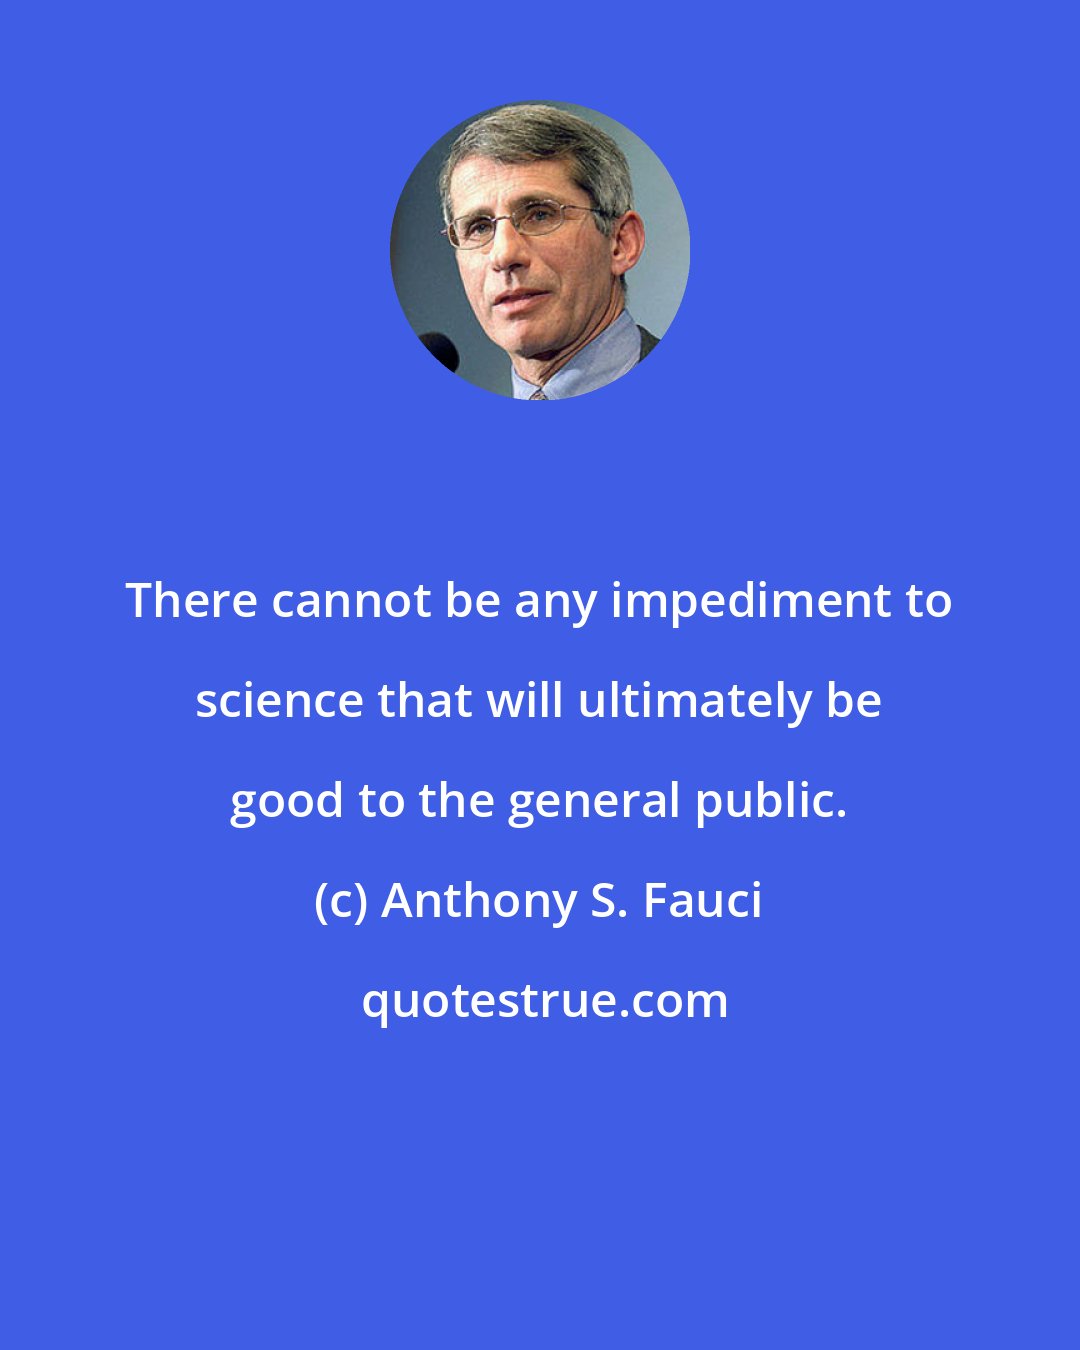 Anthony S. Fauci: There cannot be any impediment to science that will ultimately be good to the general public.